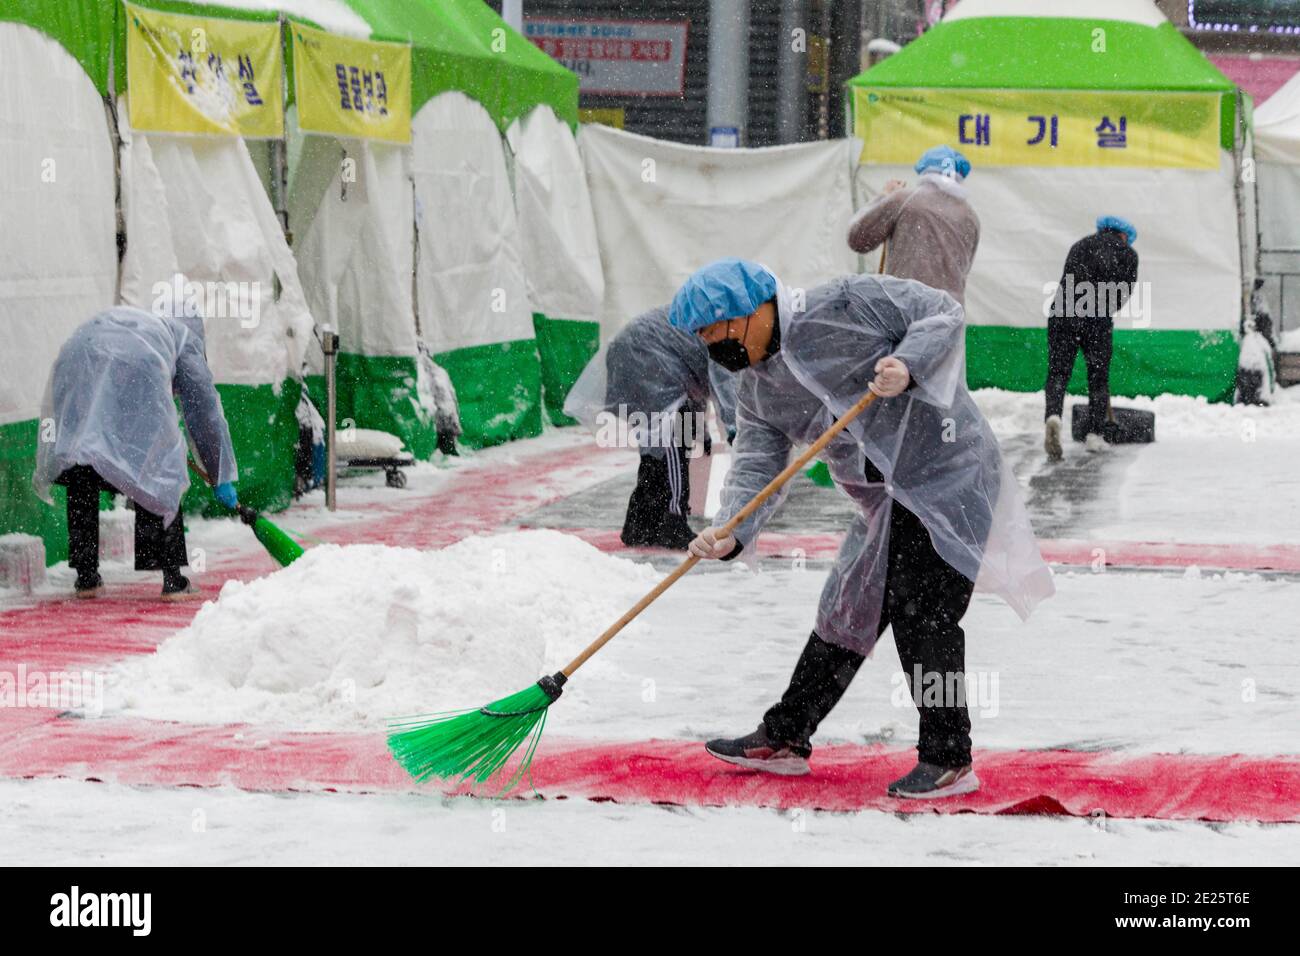 Bucheon, South Korea. 12th Jan, 2021. Workers at a coronavirus testing center in front of Bucheon Station in South Korea clean snow from the facility Tuesday. Credit: Jintak Han/ZUMA Wire/Alamy Live News Stock Photo